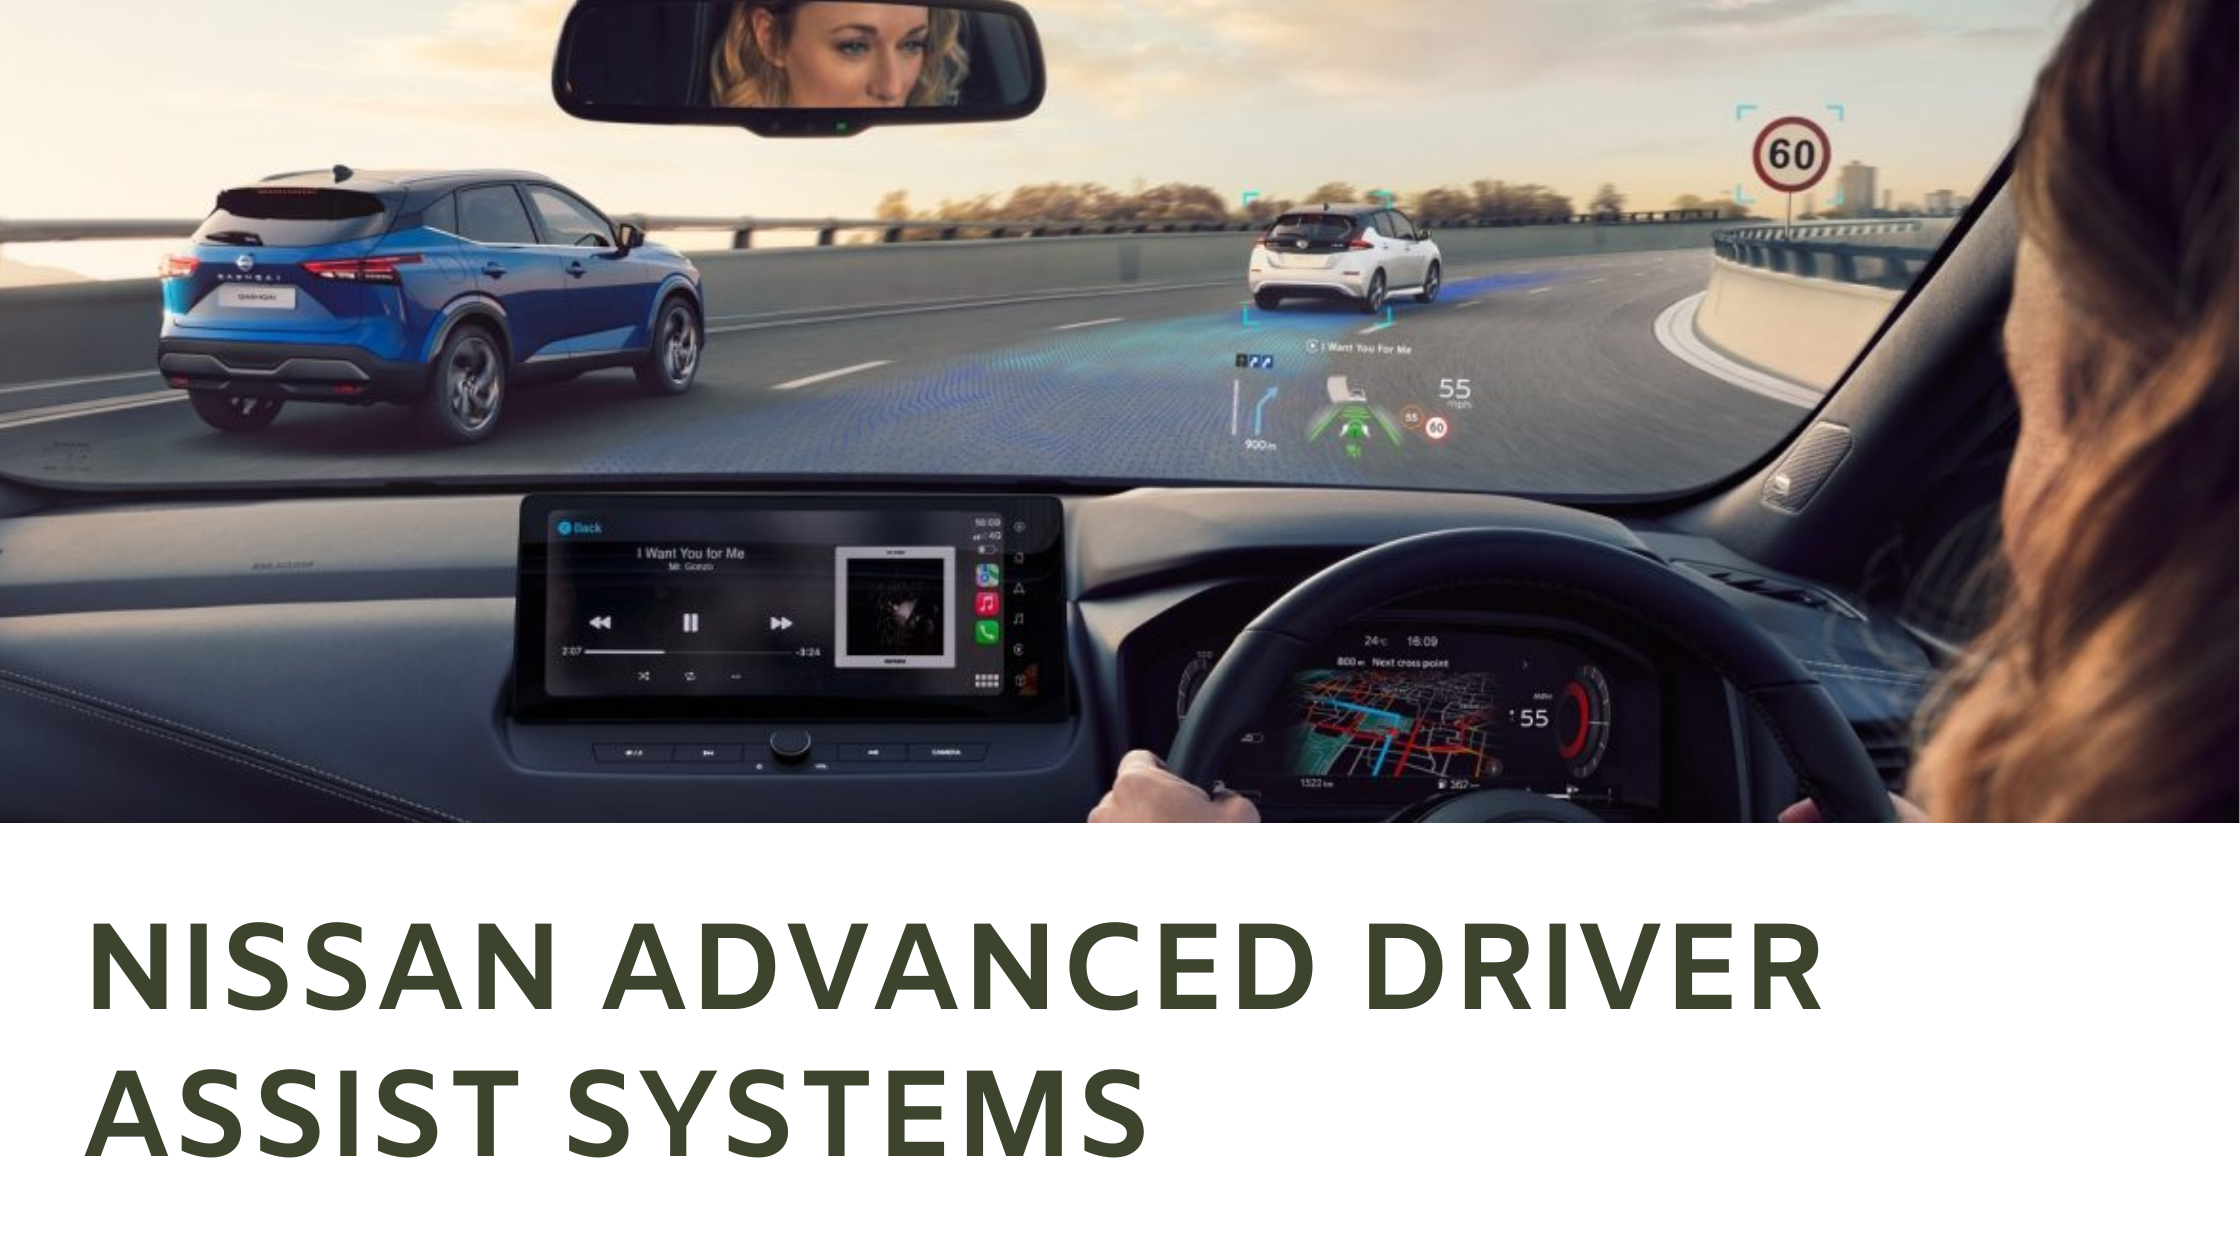 Nissan Advanced Driver Assist Features